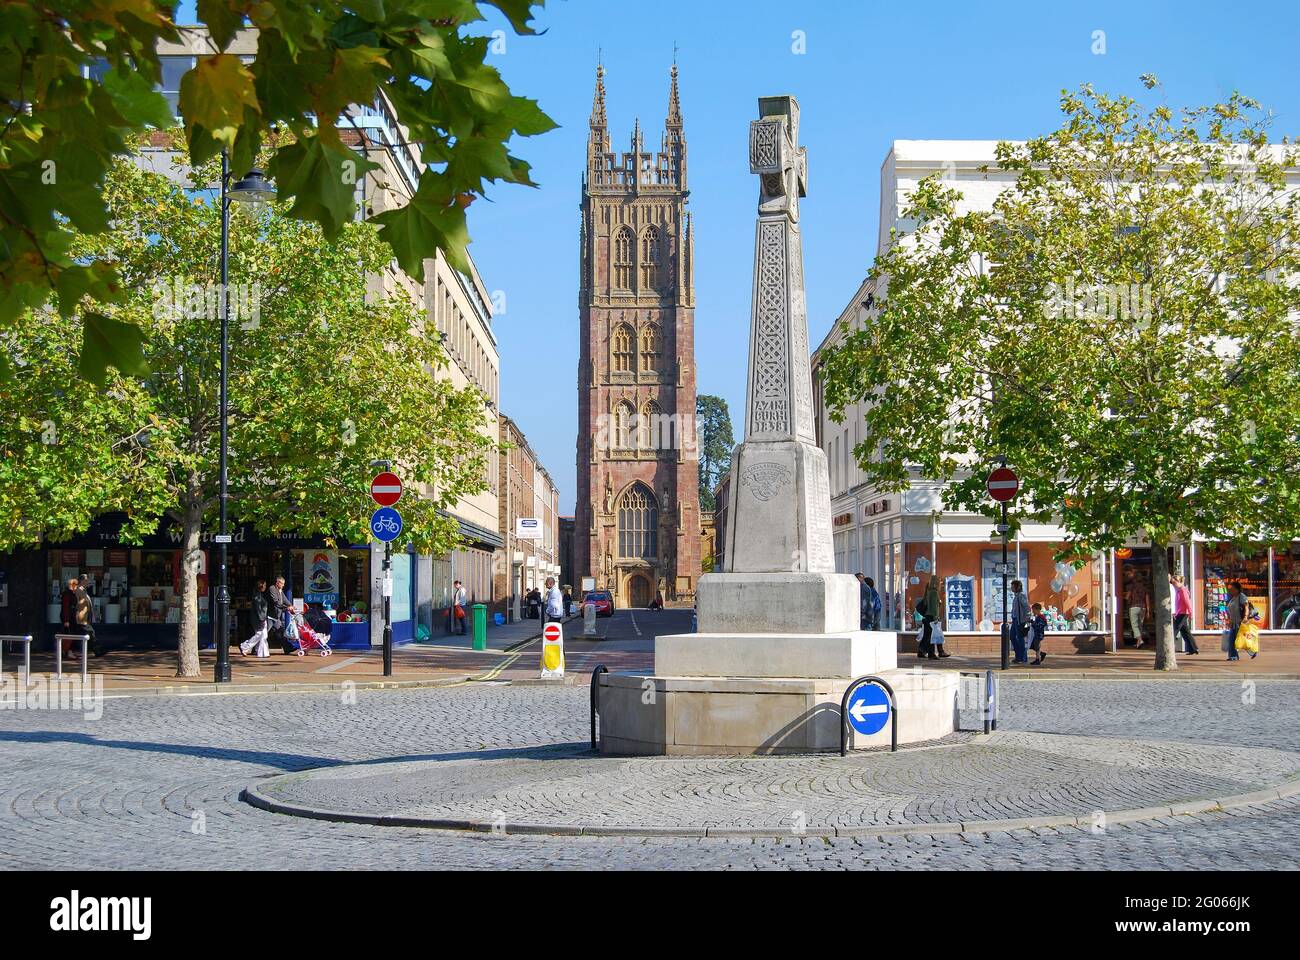 The War Memorial and town centre, Fore Street, Taunton, Somerset, England, United Kingdom Stock Photo